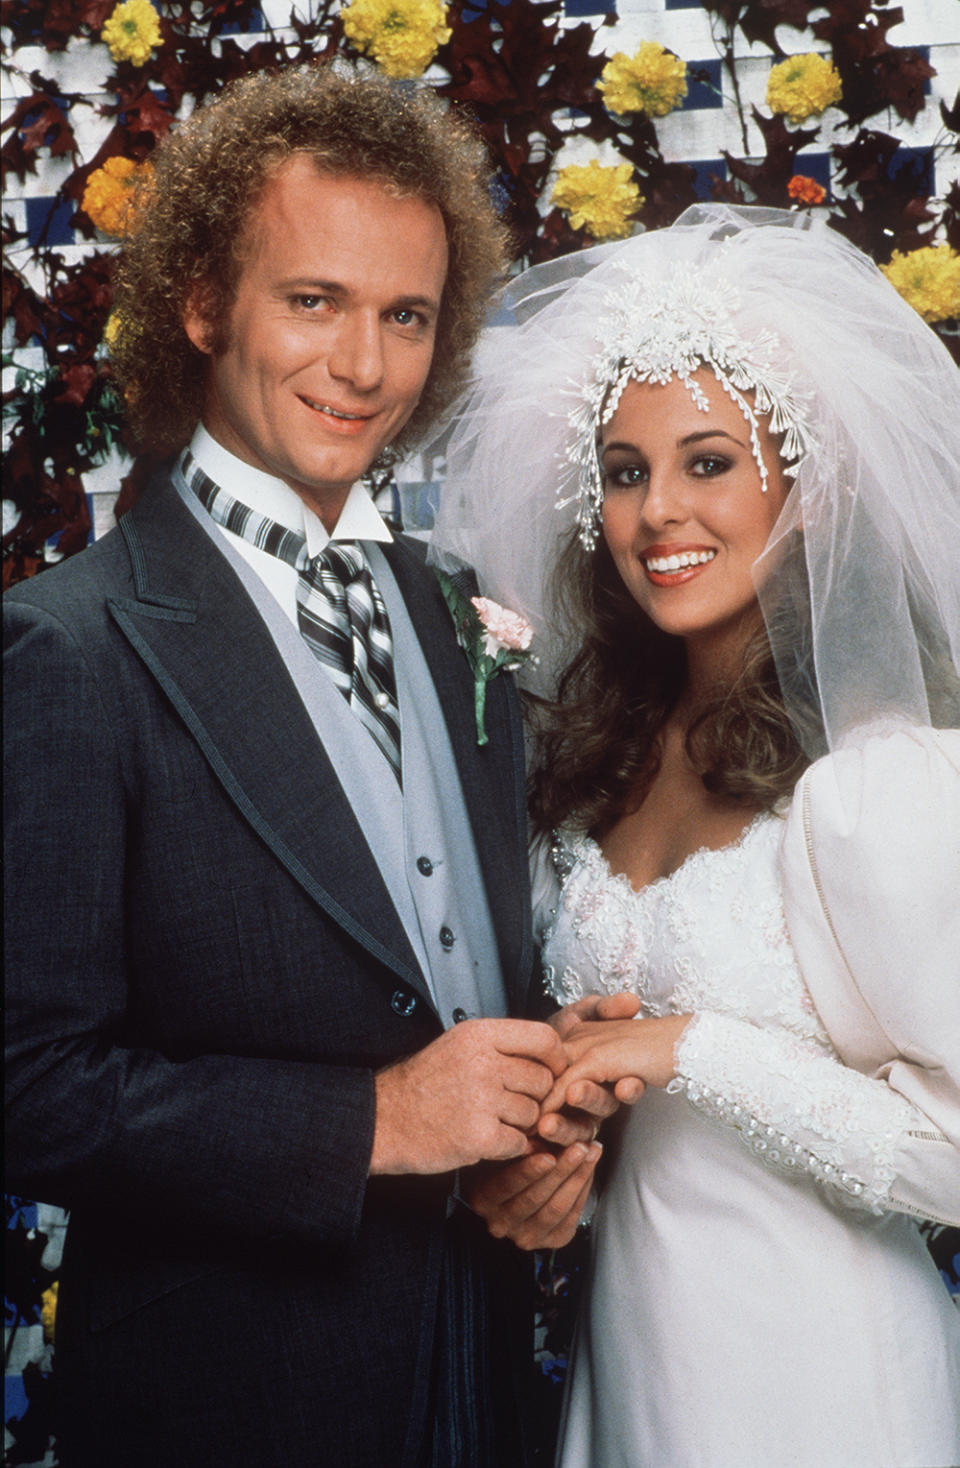 GENERAL HOSPITAL - Luke and Laura's wedding - 11/16/81
Luke (Anthony Geary) and Laura (Genie Francis) put their turbulent past behind them and married on the grounds of the Port Charles mayor's mansion, on Monday, Nov. 16 and Tuesday, Nov. 17, 1981, when Walt Disney Television via Getty Images Daytime invited the world to tune in to the daytime wedding of the decade, on 